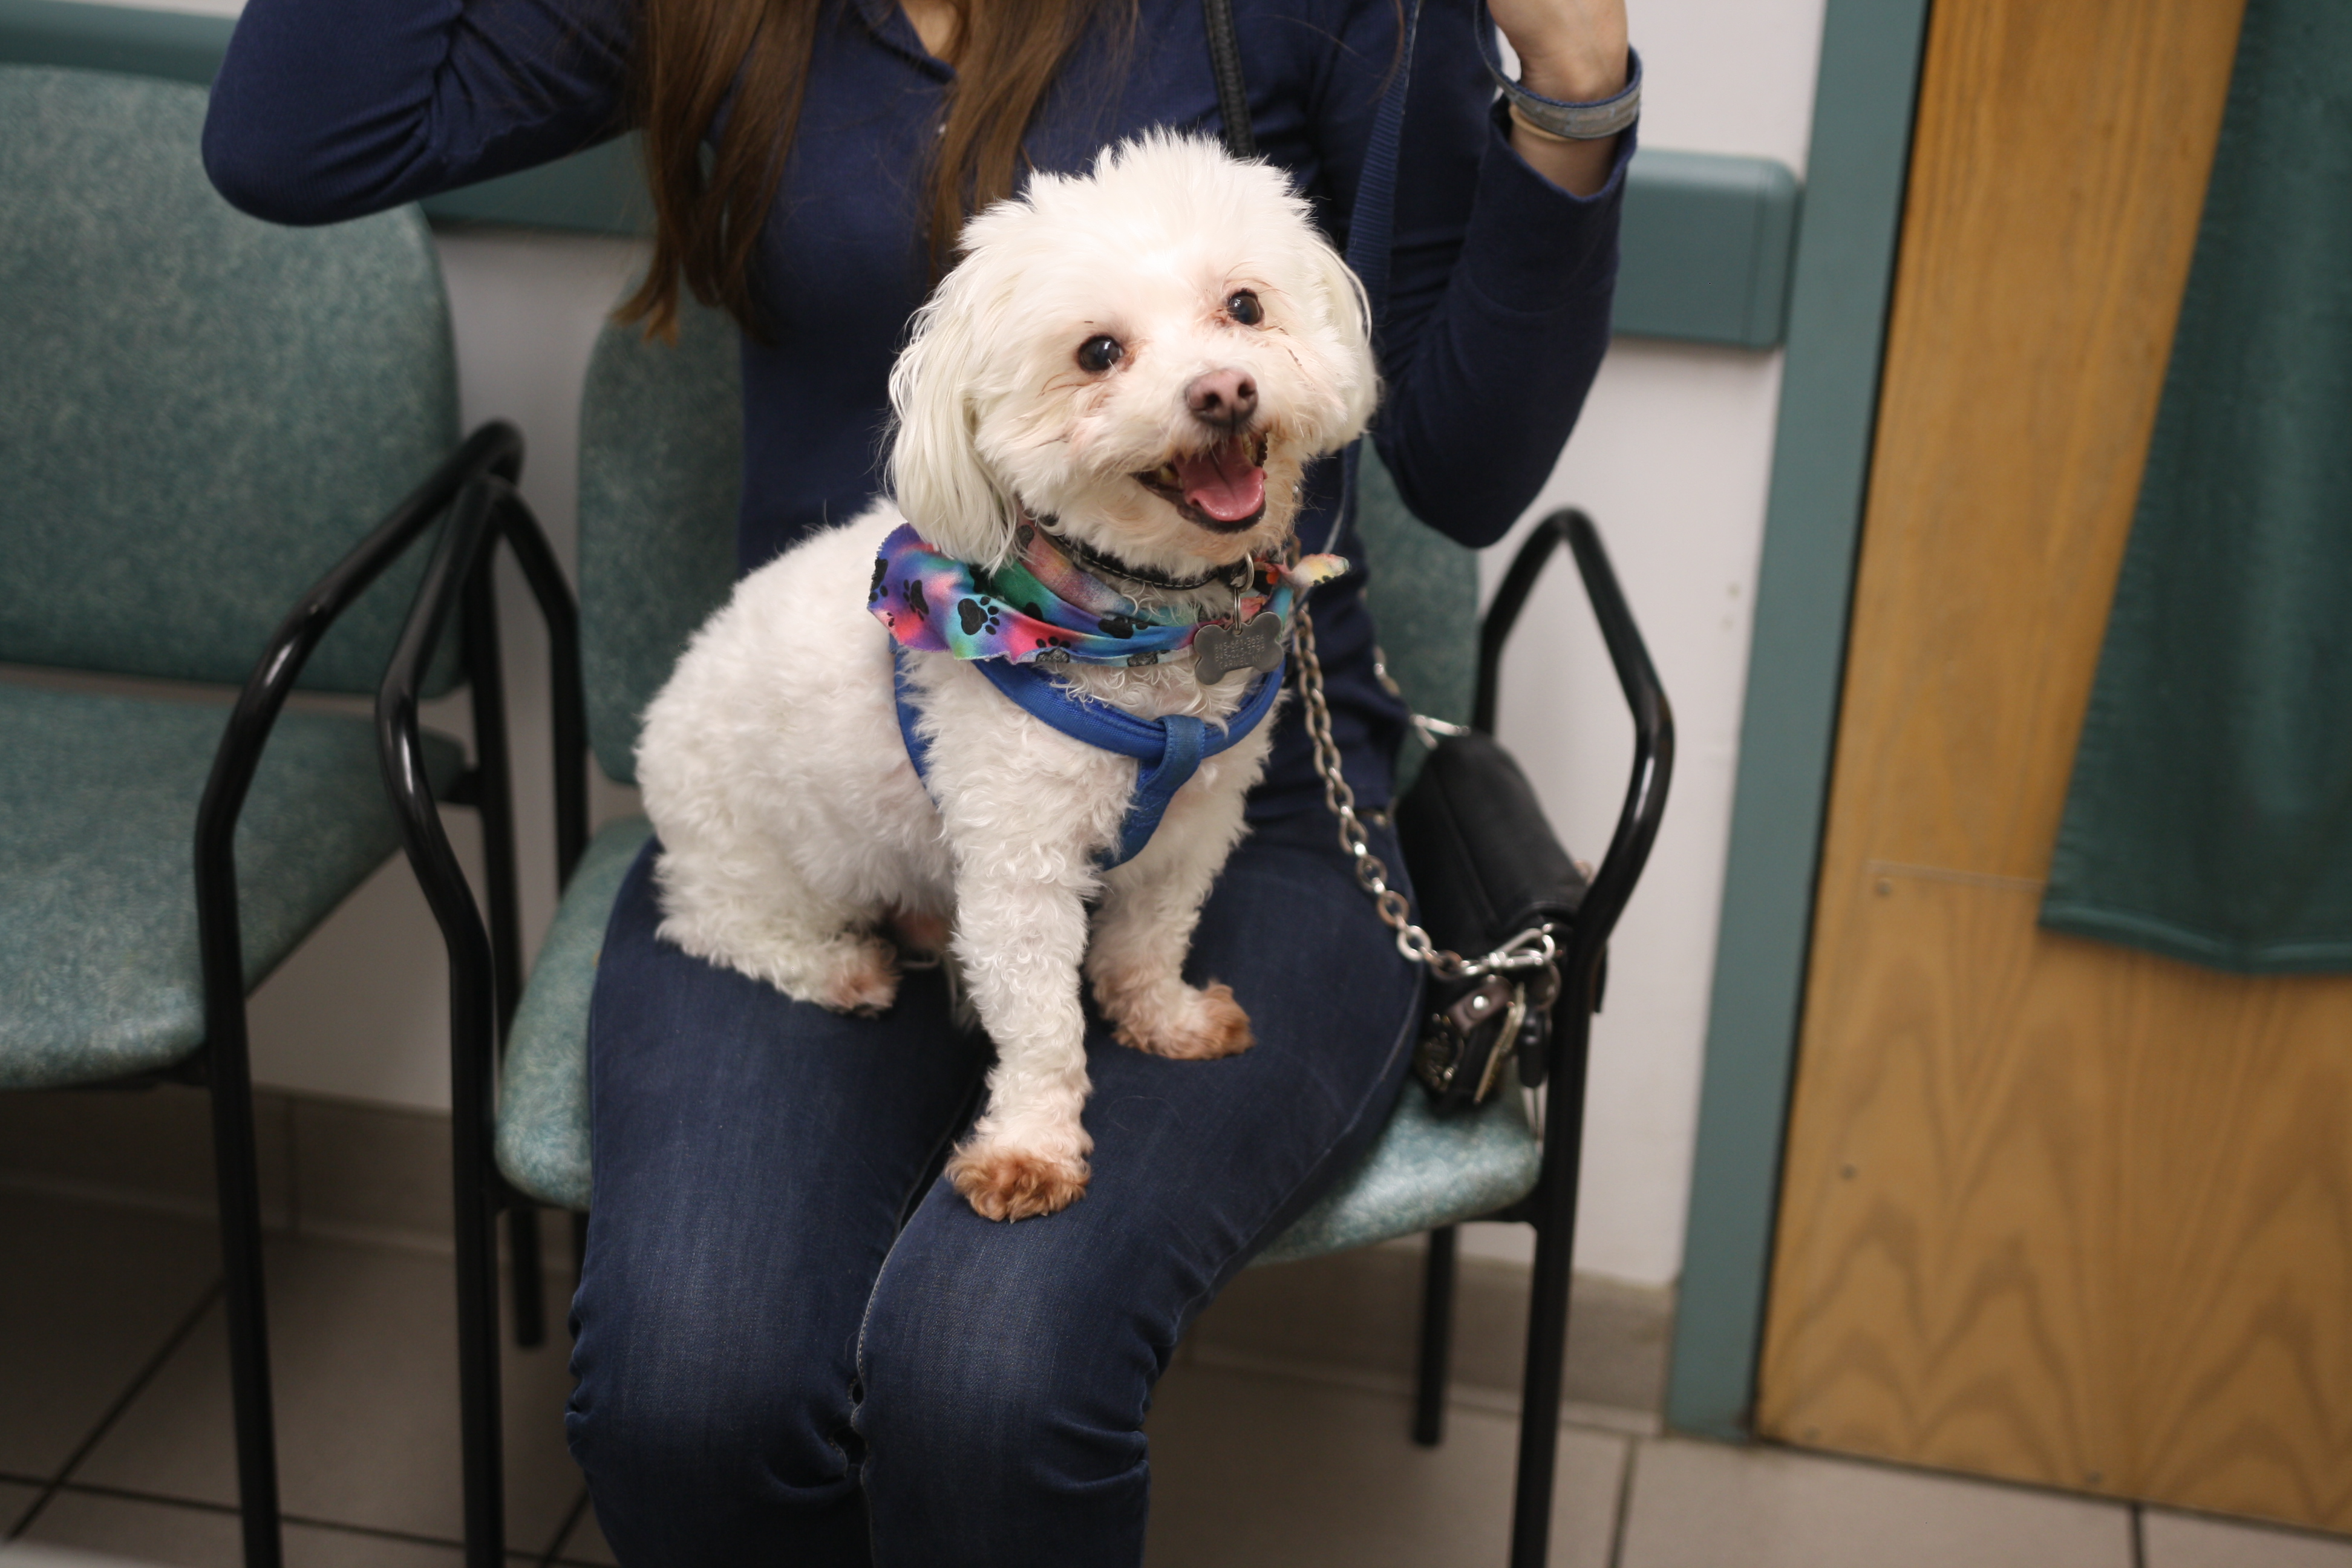 Look at that smile! This pup looks so happy getting ready for her examination.